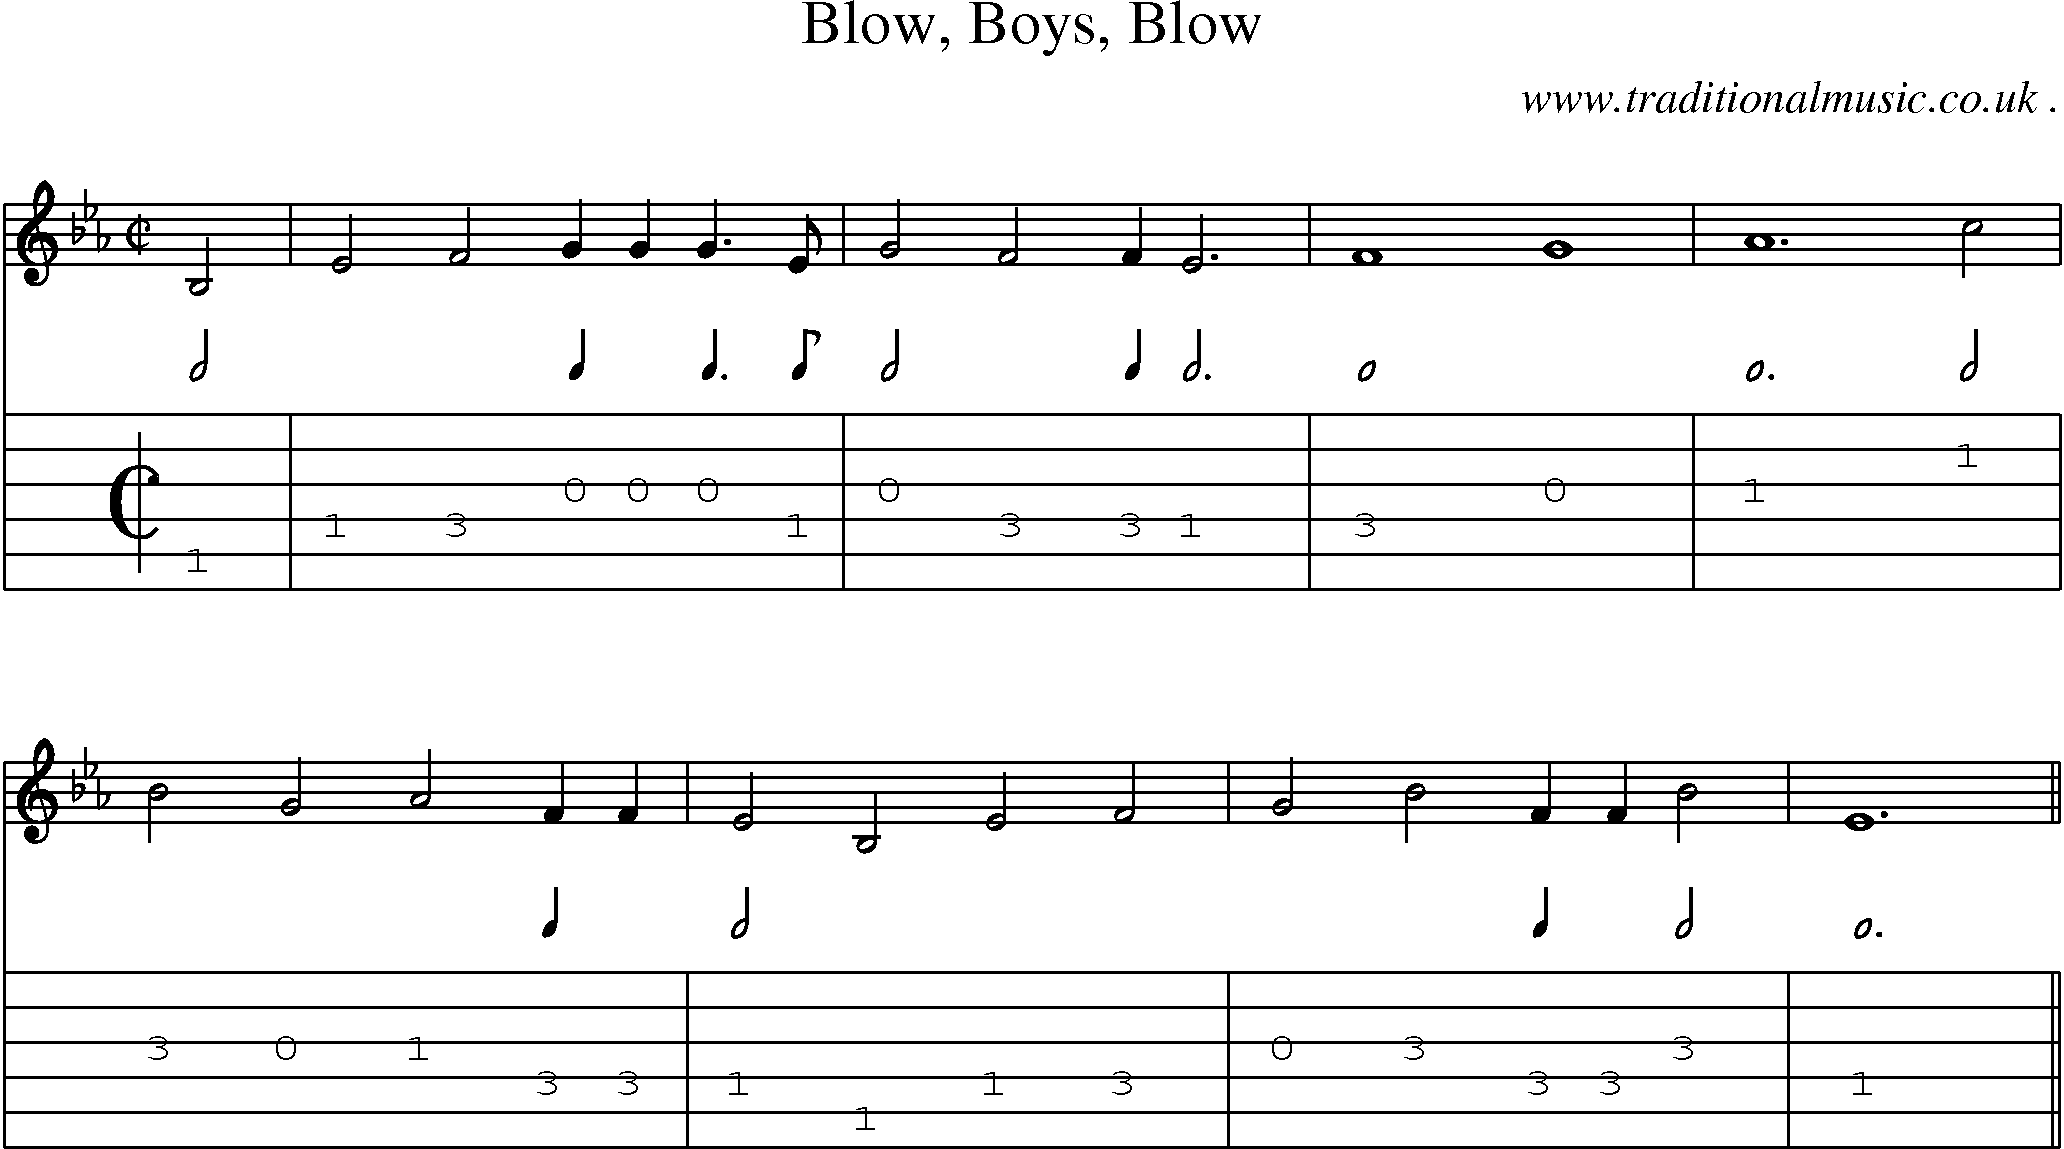 Sheet-Music and Guitar Tabs for Blow Boys Blow